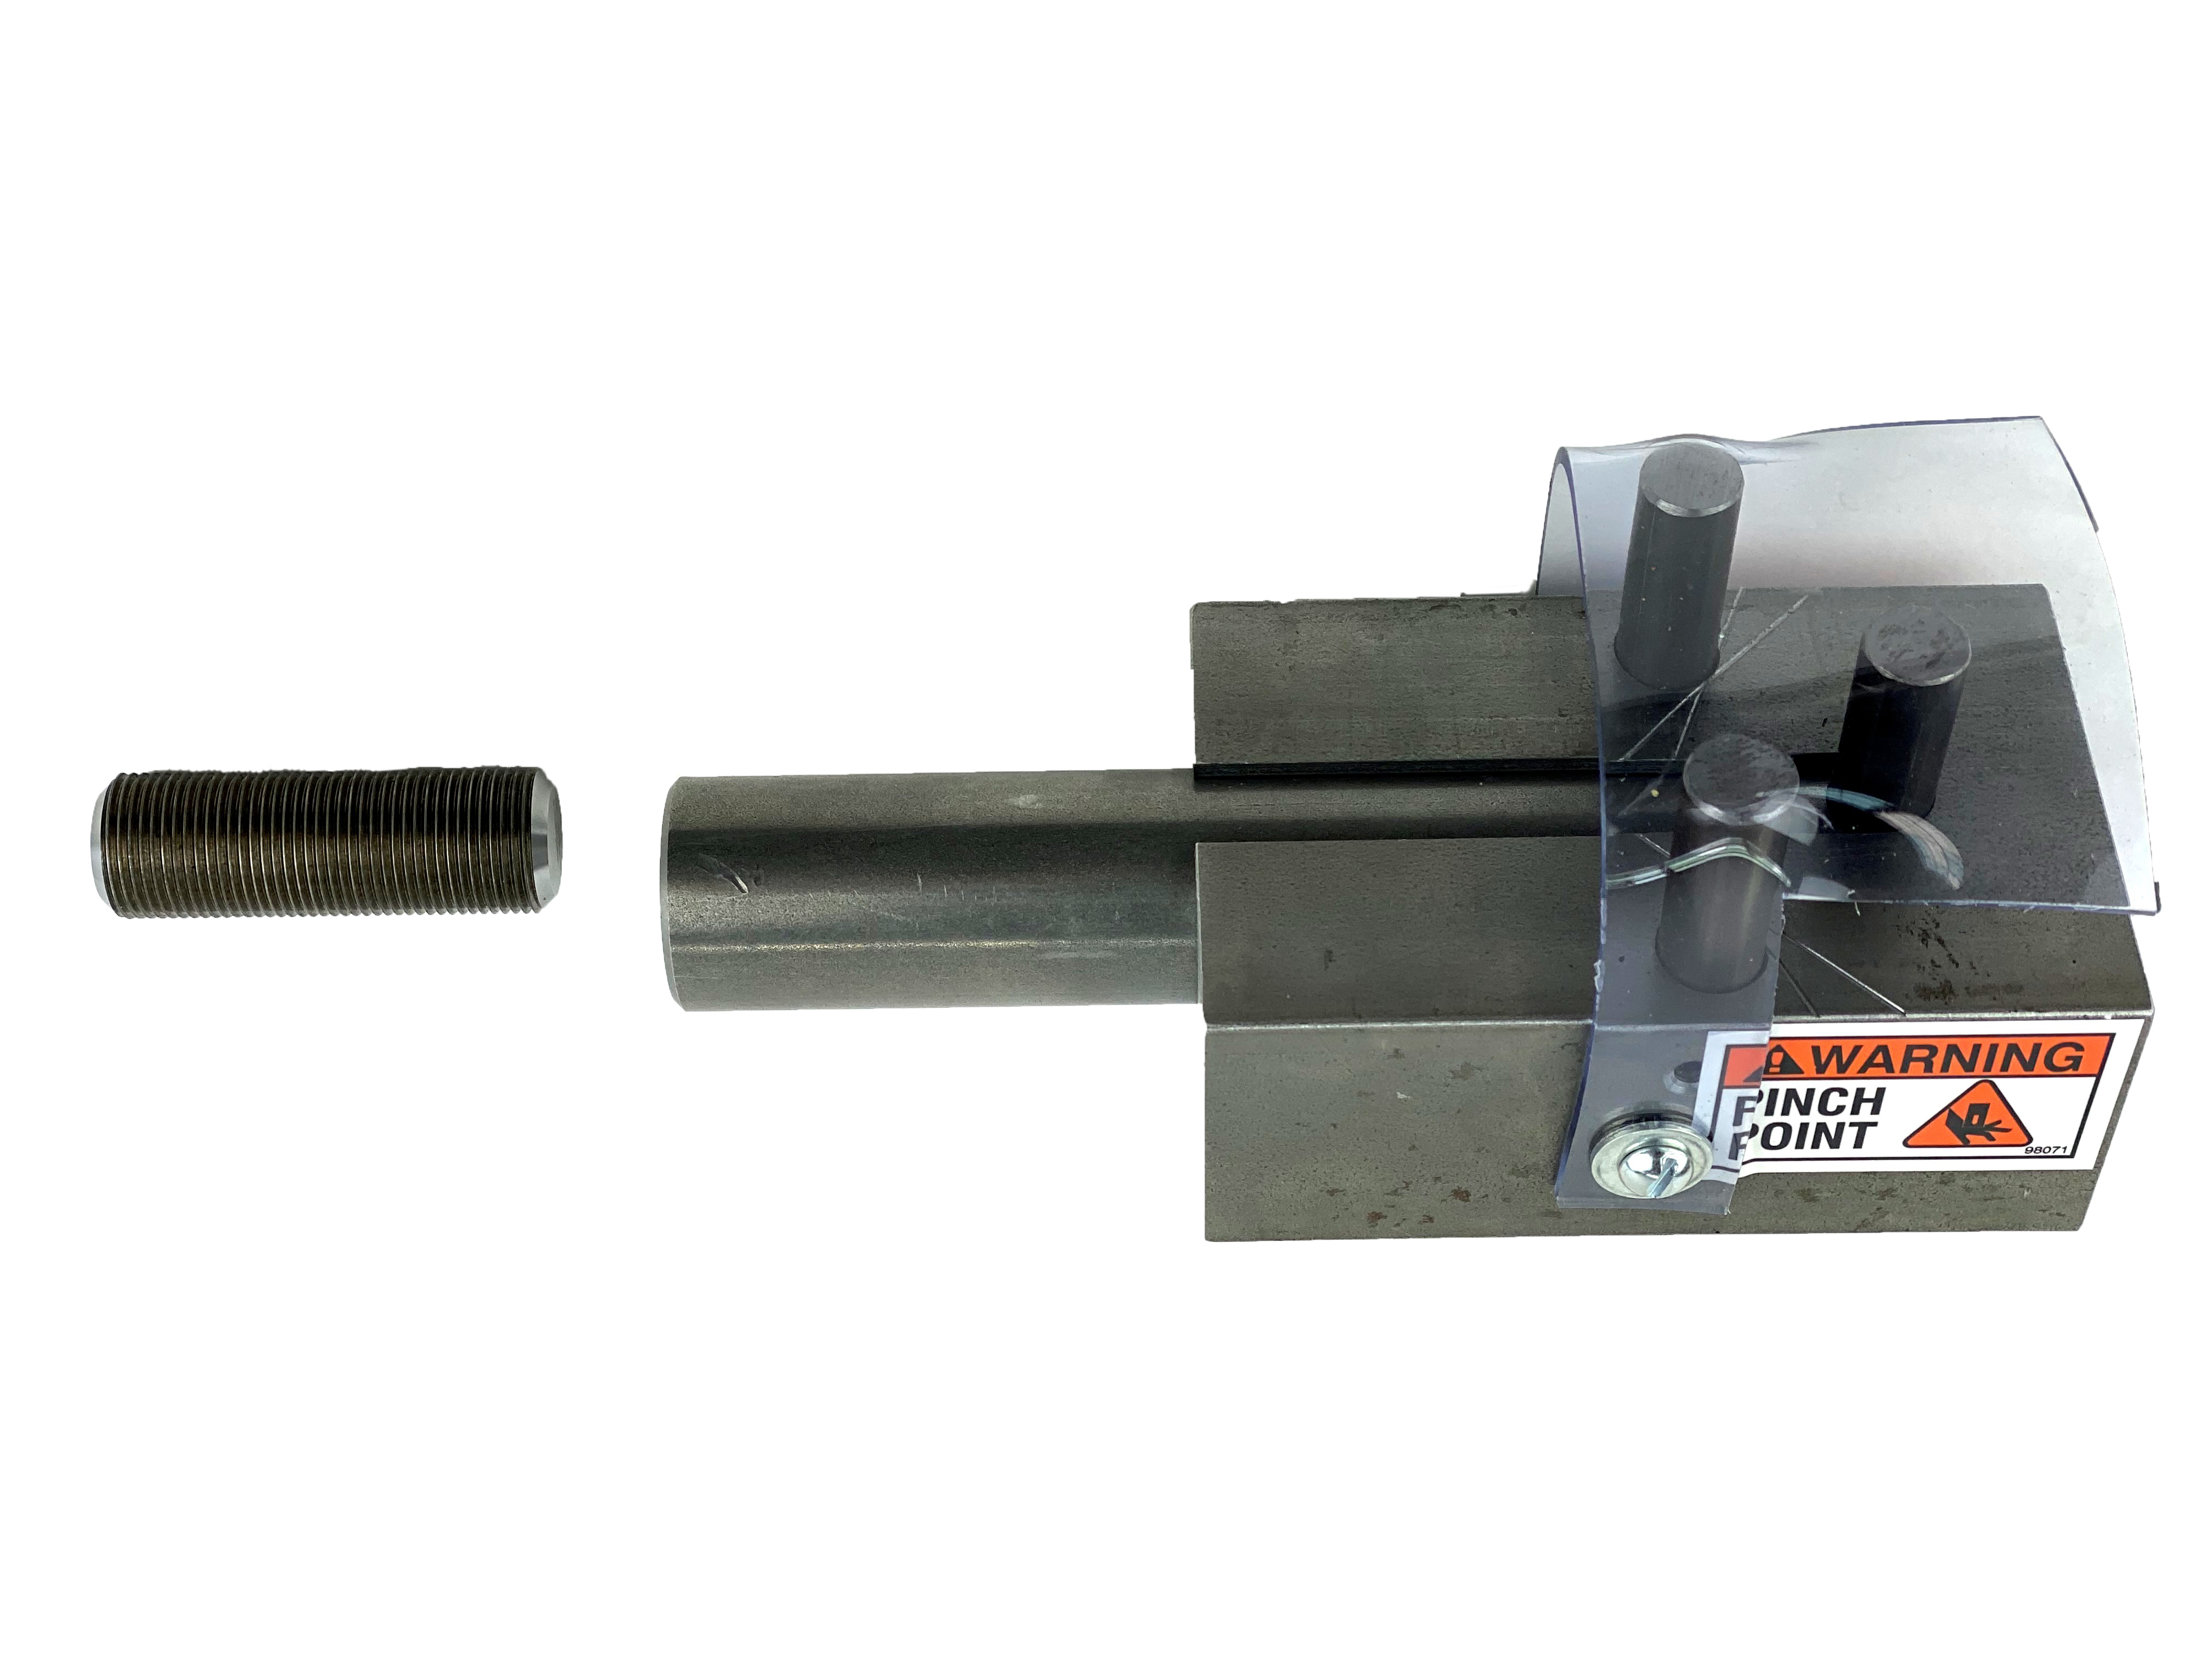 A Huth Rod Bracket Bender with Threaded Stud is shown against a white background. This accessory expands the use of BendPak® machines.